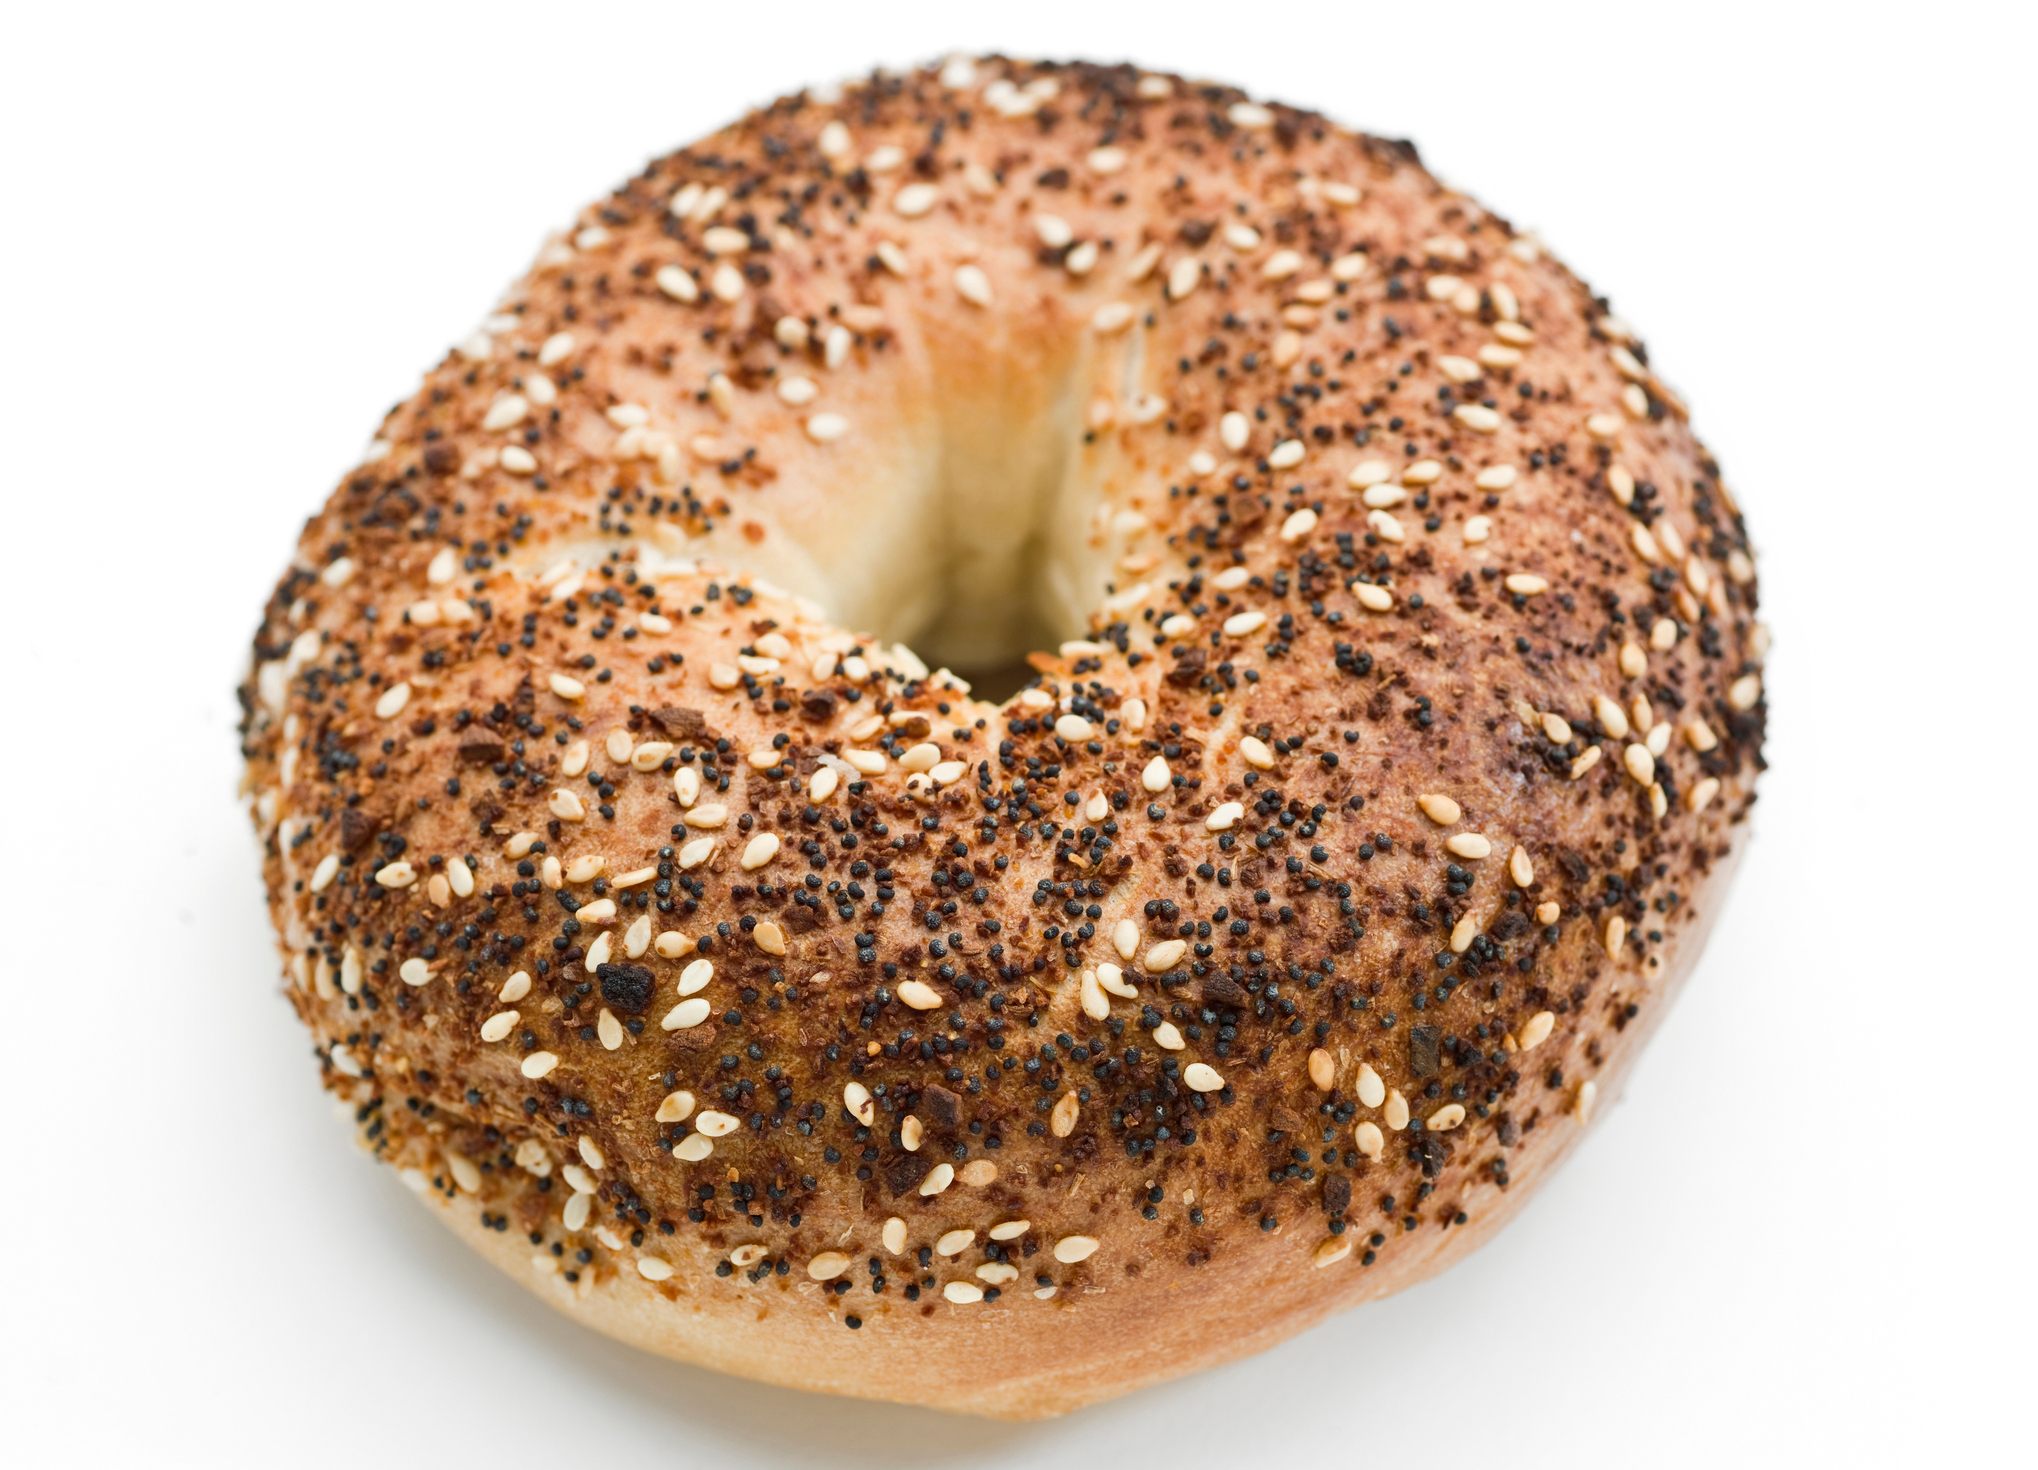 Expert Bagel Maker Confirms: You Don't Need Lye To Make a Good